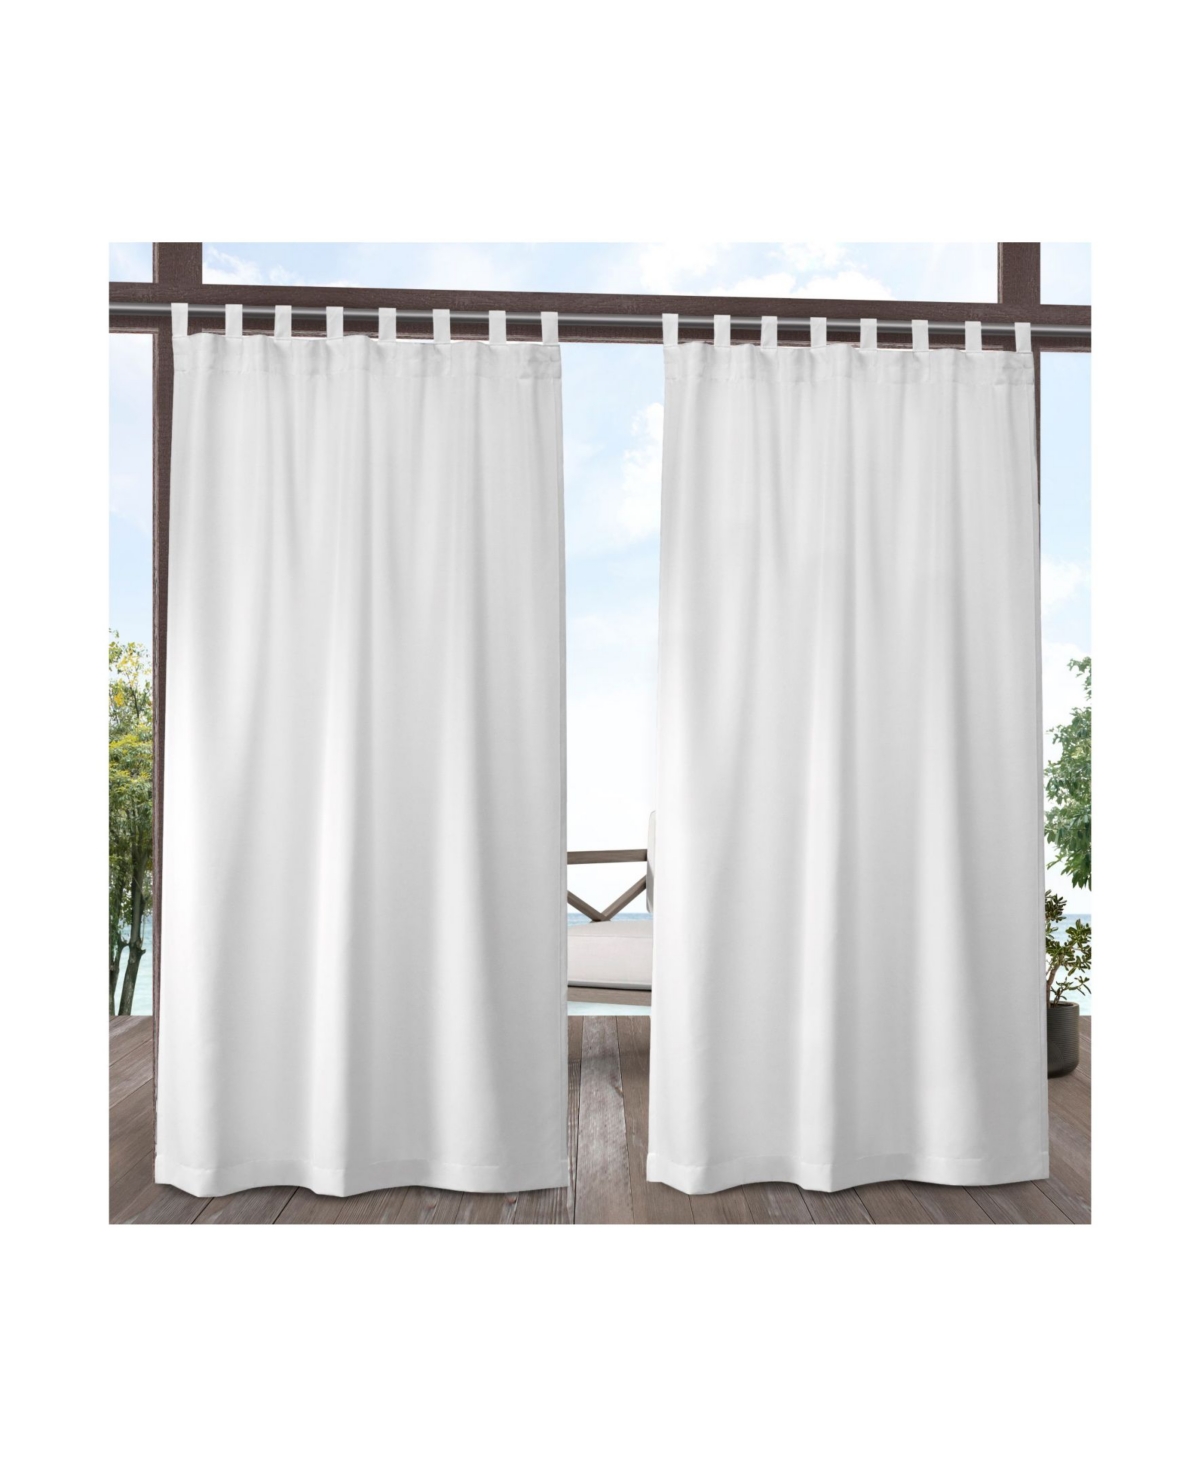 Indoor/Outdoor Solid Cabana Tab Top Curtain Panel Pair, 54" x 108" - White